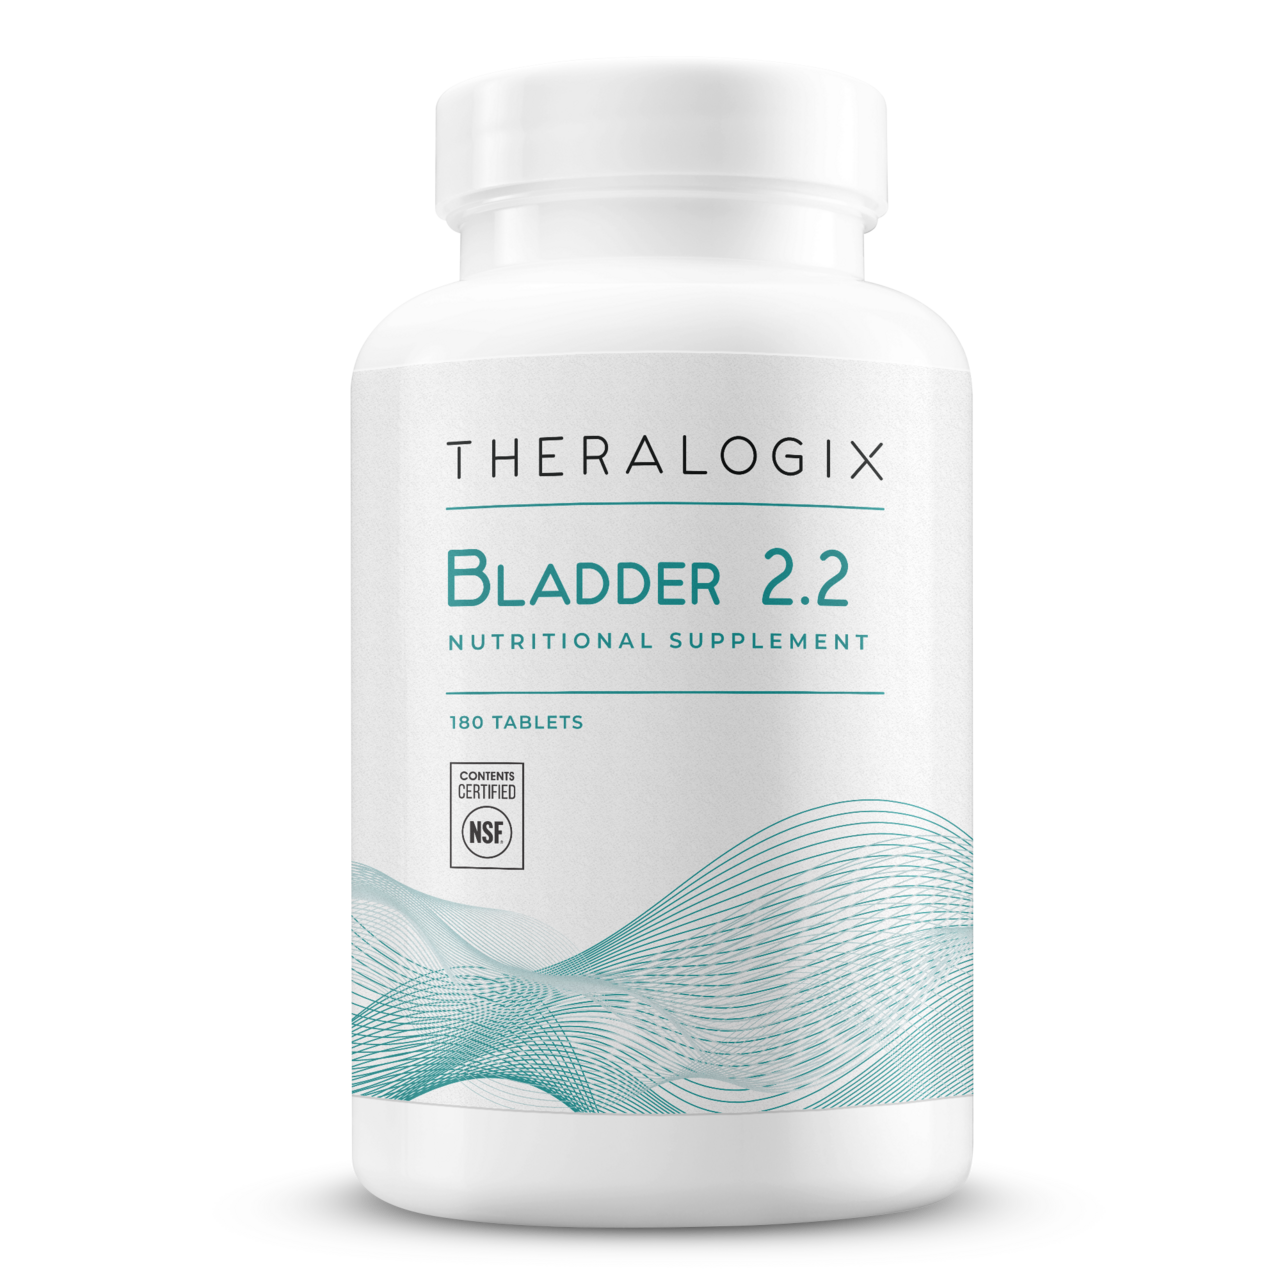 Prostate PQ™ Pollen Extract Supplement | Theralogix